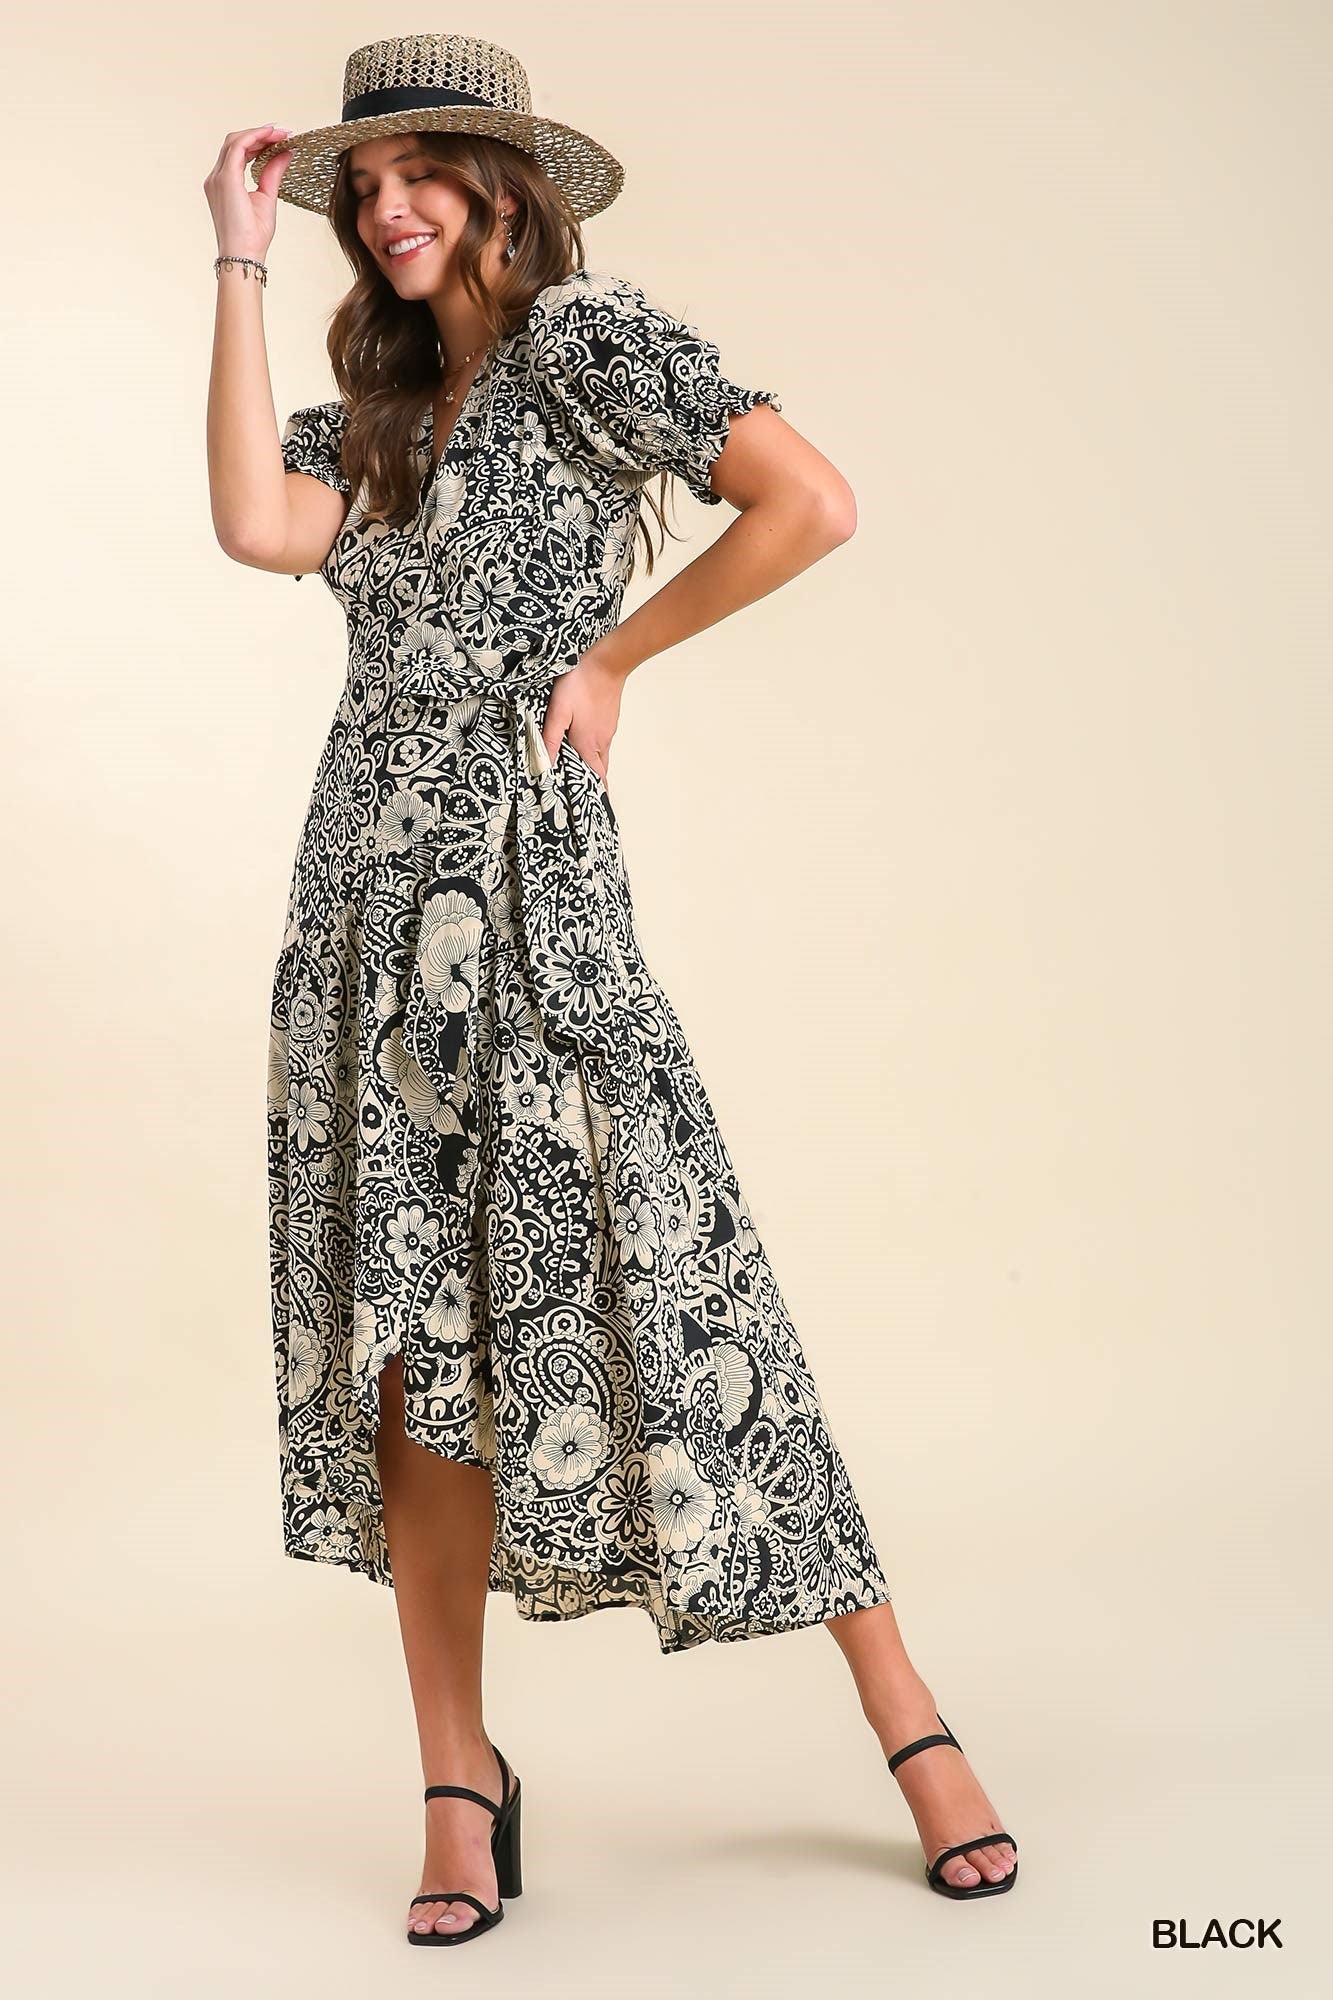 Stunning Wrap Abstract Print Dress in Black